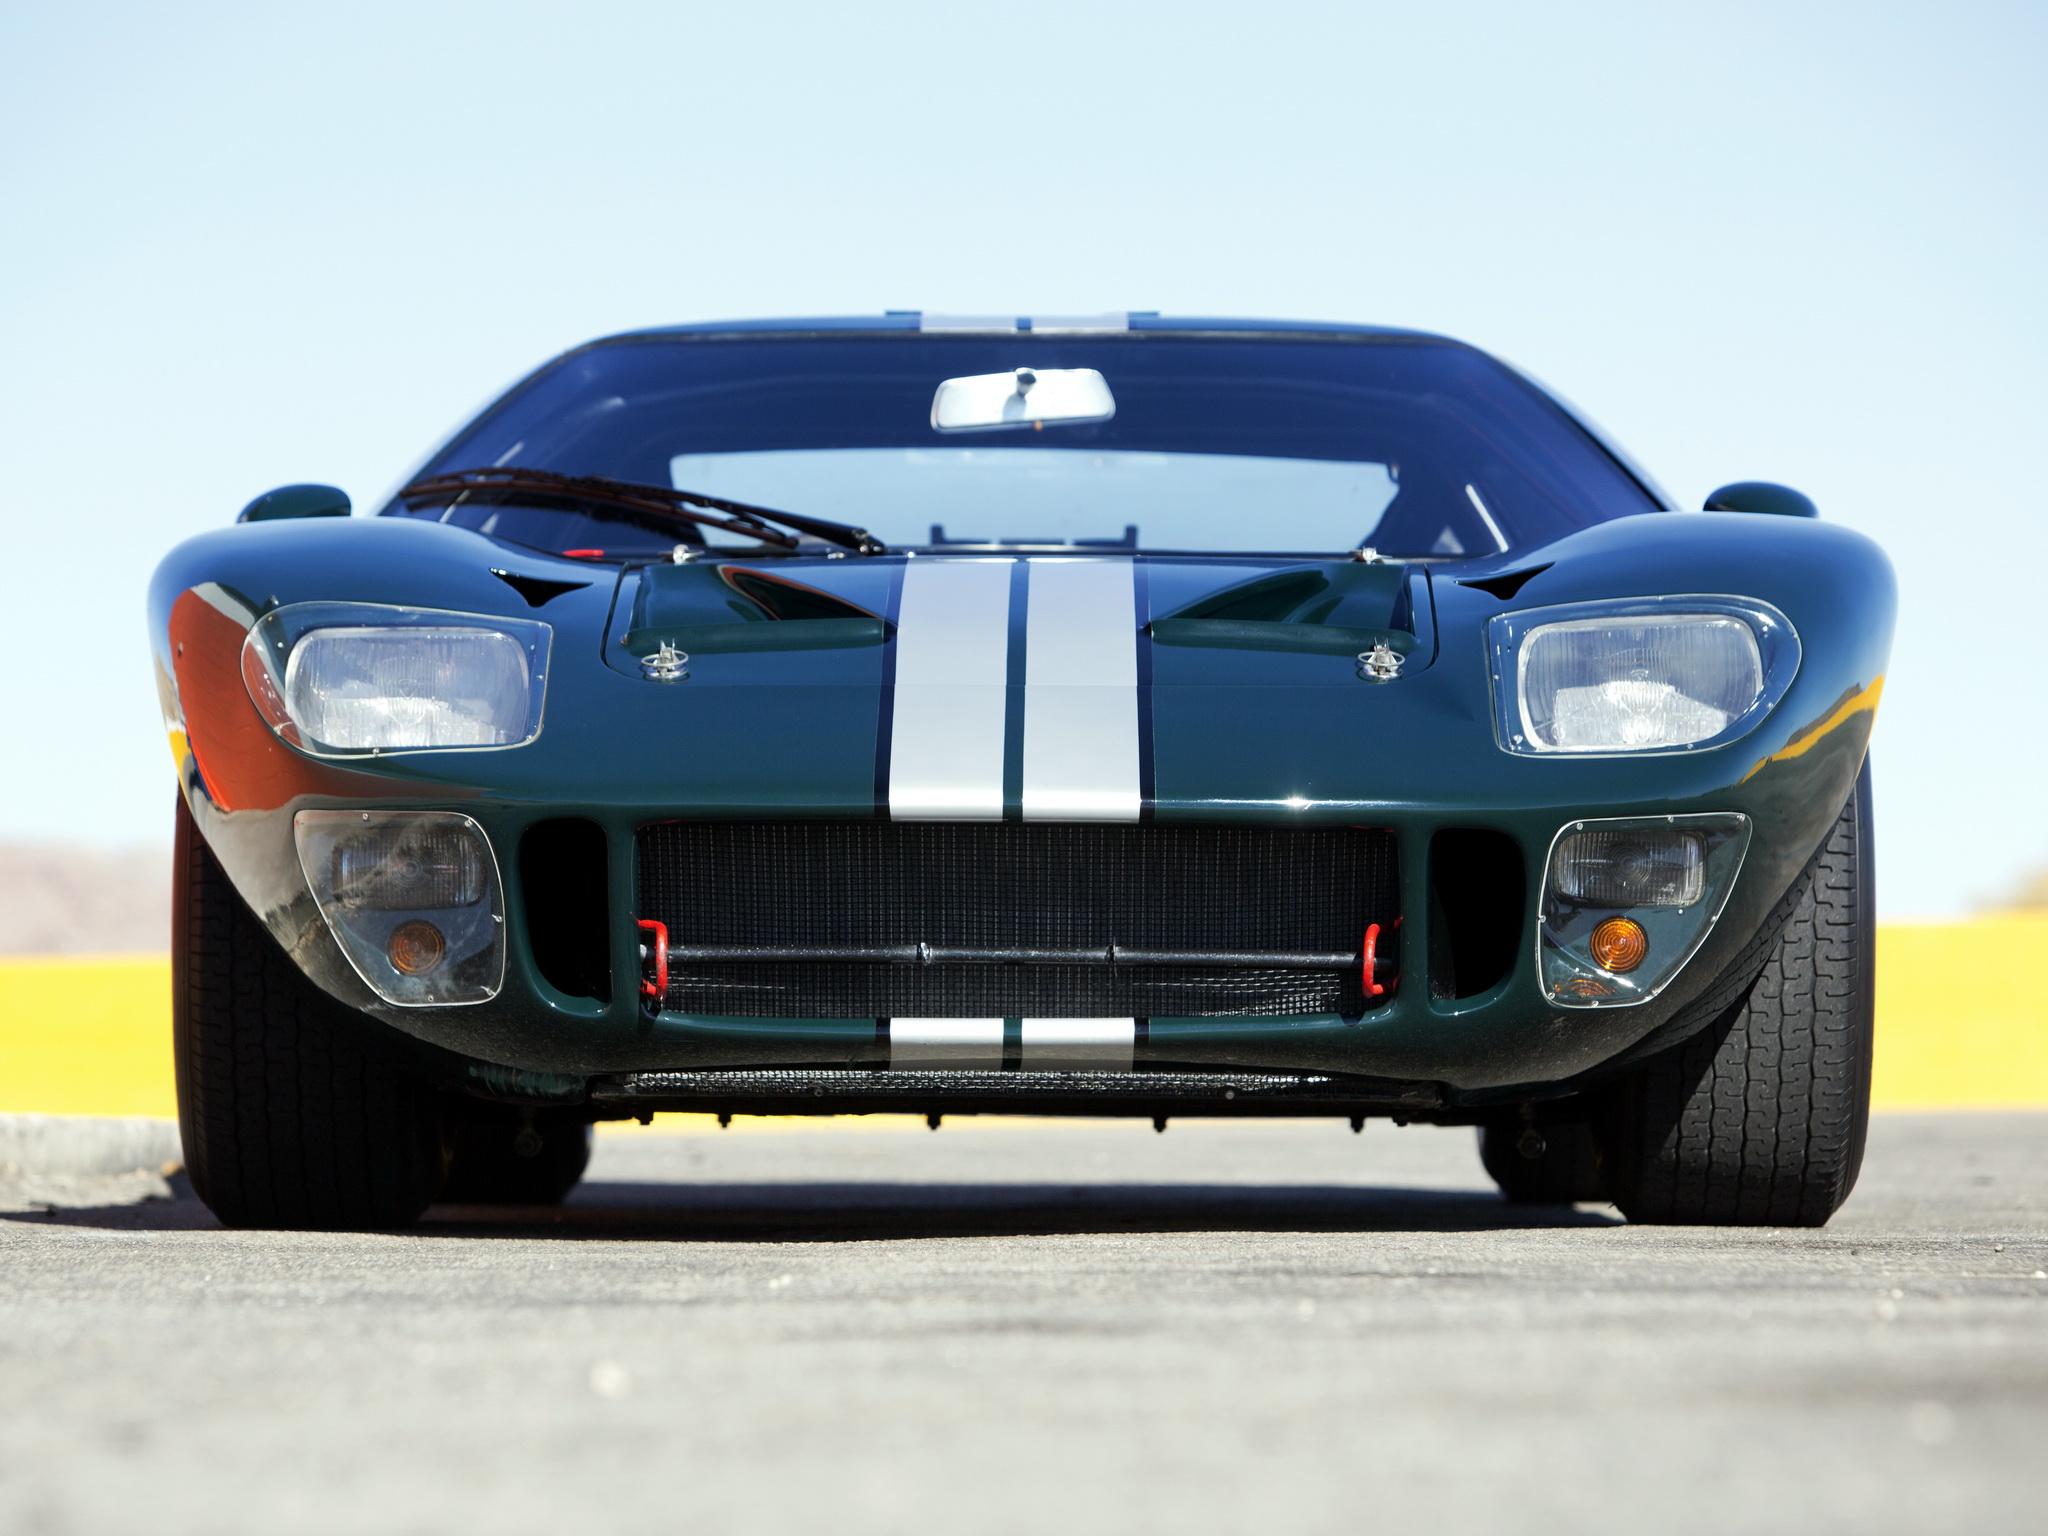 1965, Ford, Gt40, Mkii, Supercar, Race, Racing, Classic, G t, Fs Wallpaper